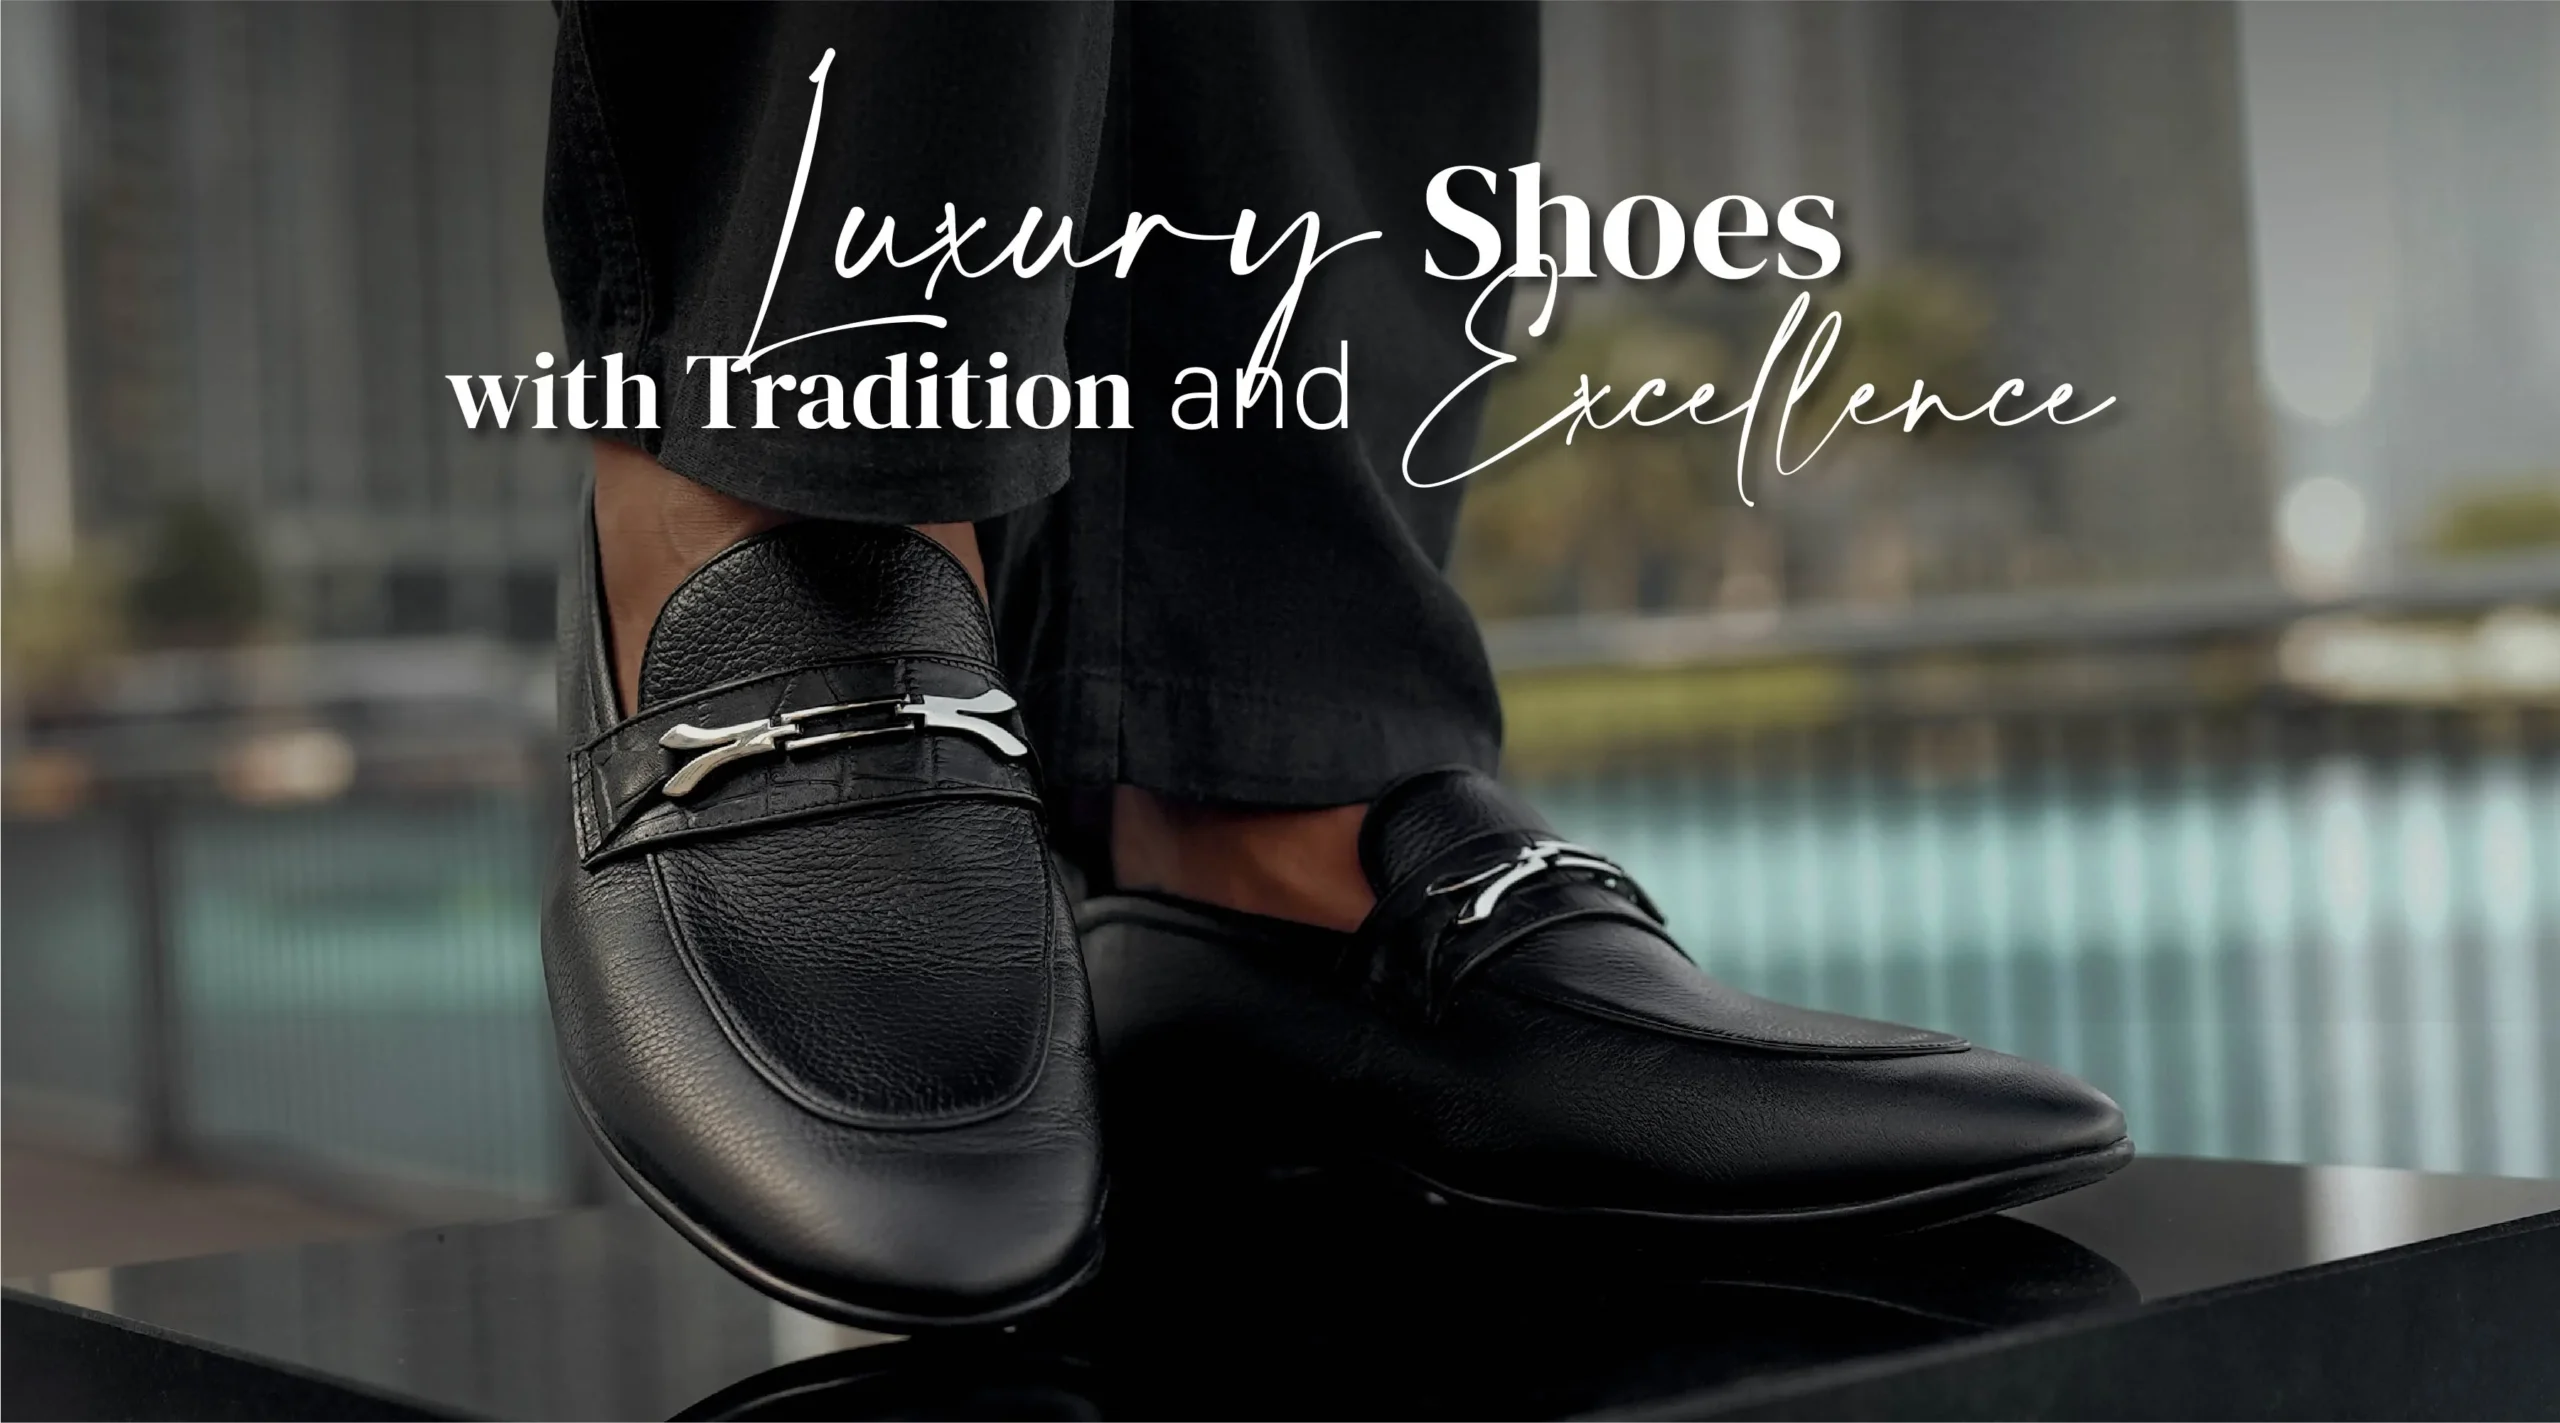 LOGO Official: Luxury Shoes with Tradition and Excellence